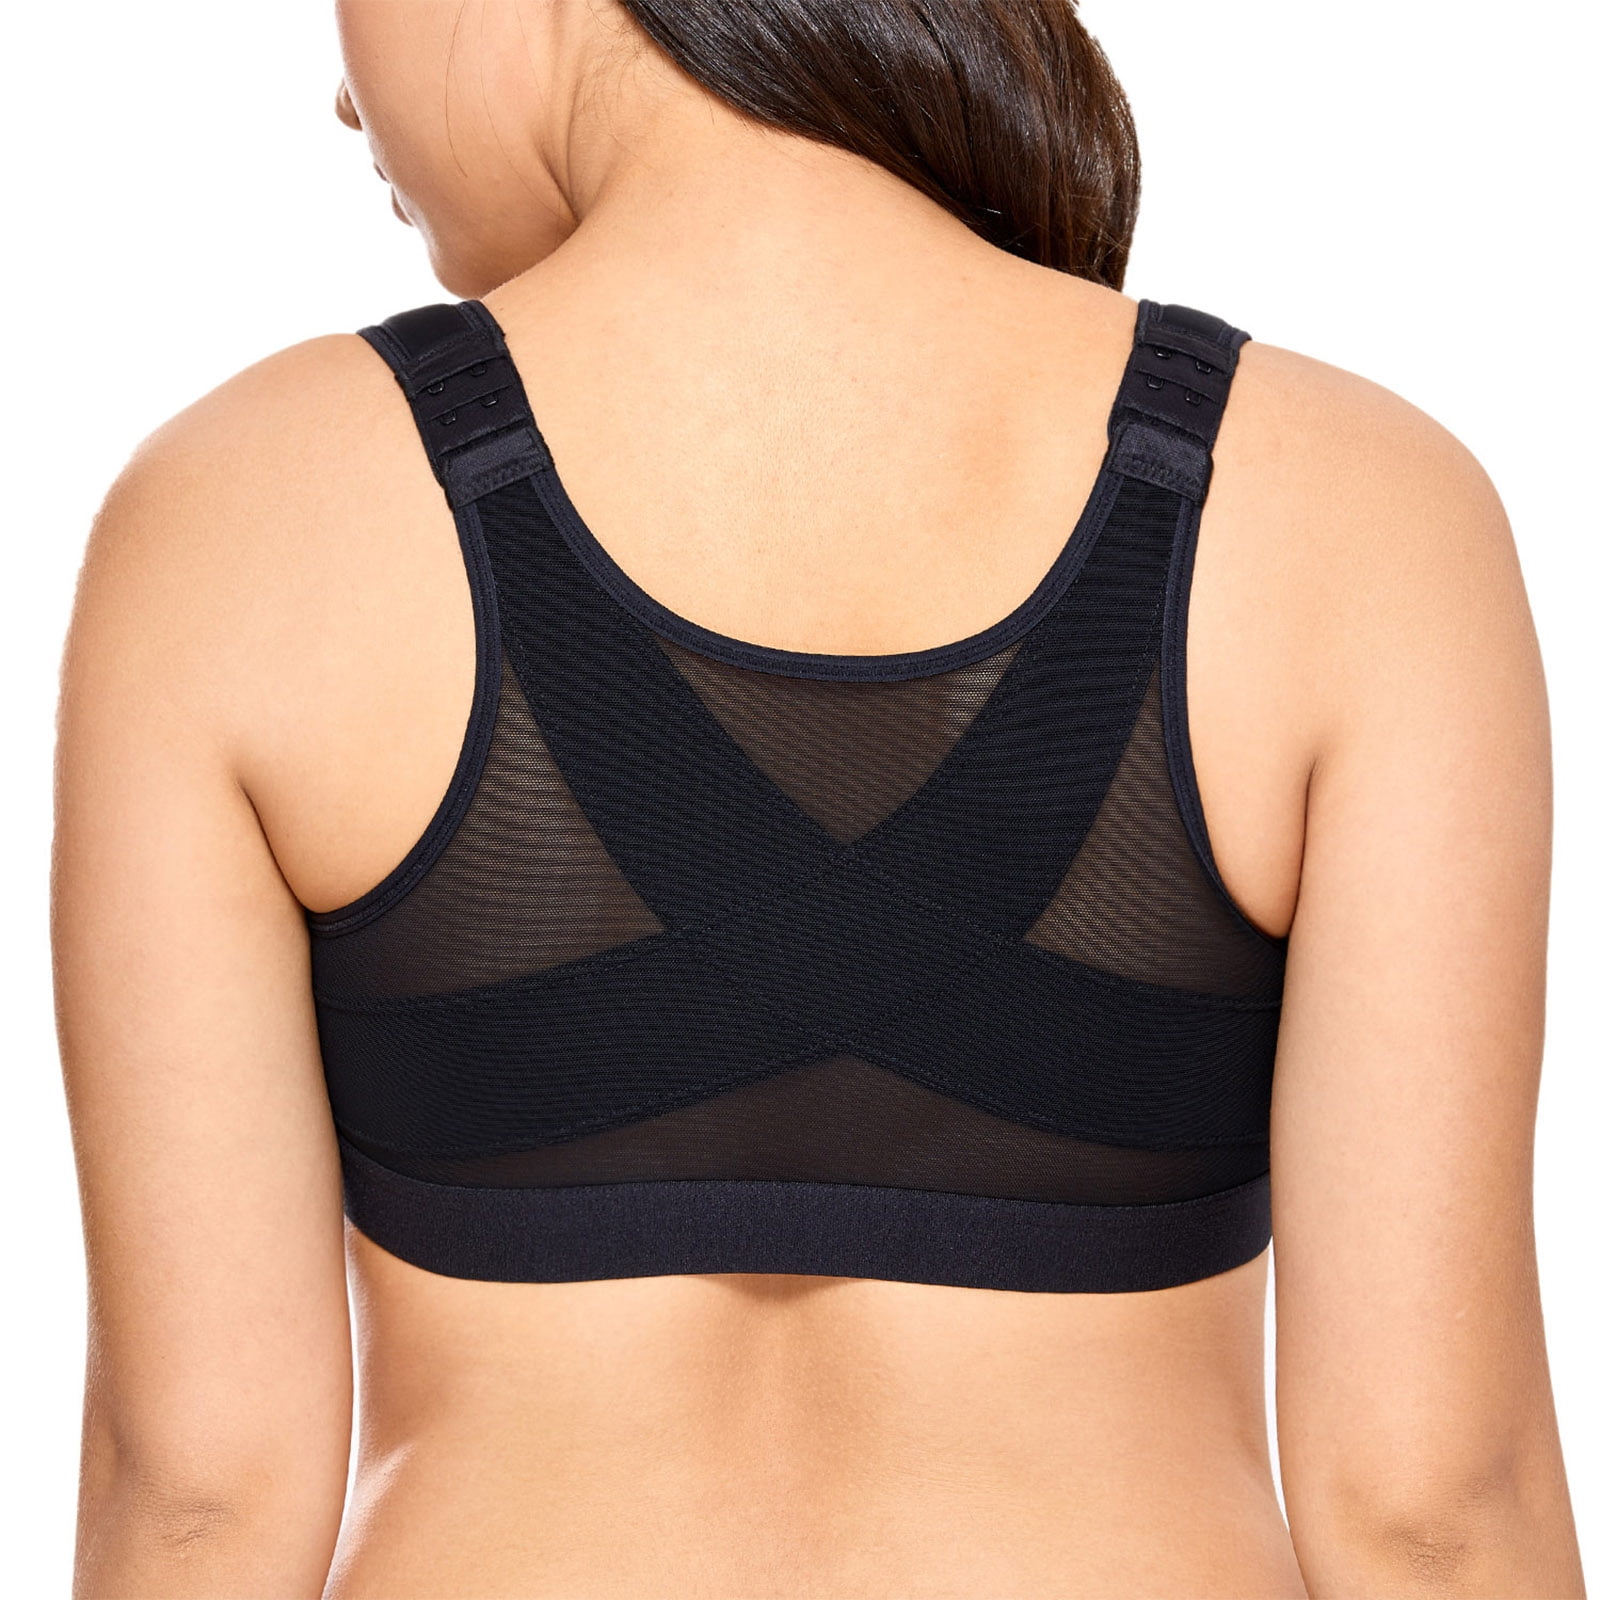 Details about   DELIMIRA Women's Front Closure Bra Full Coverage Wire Free Back Support Posture 